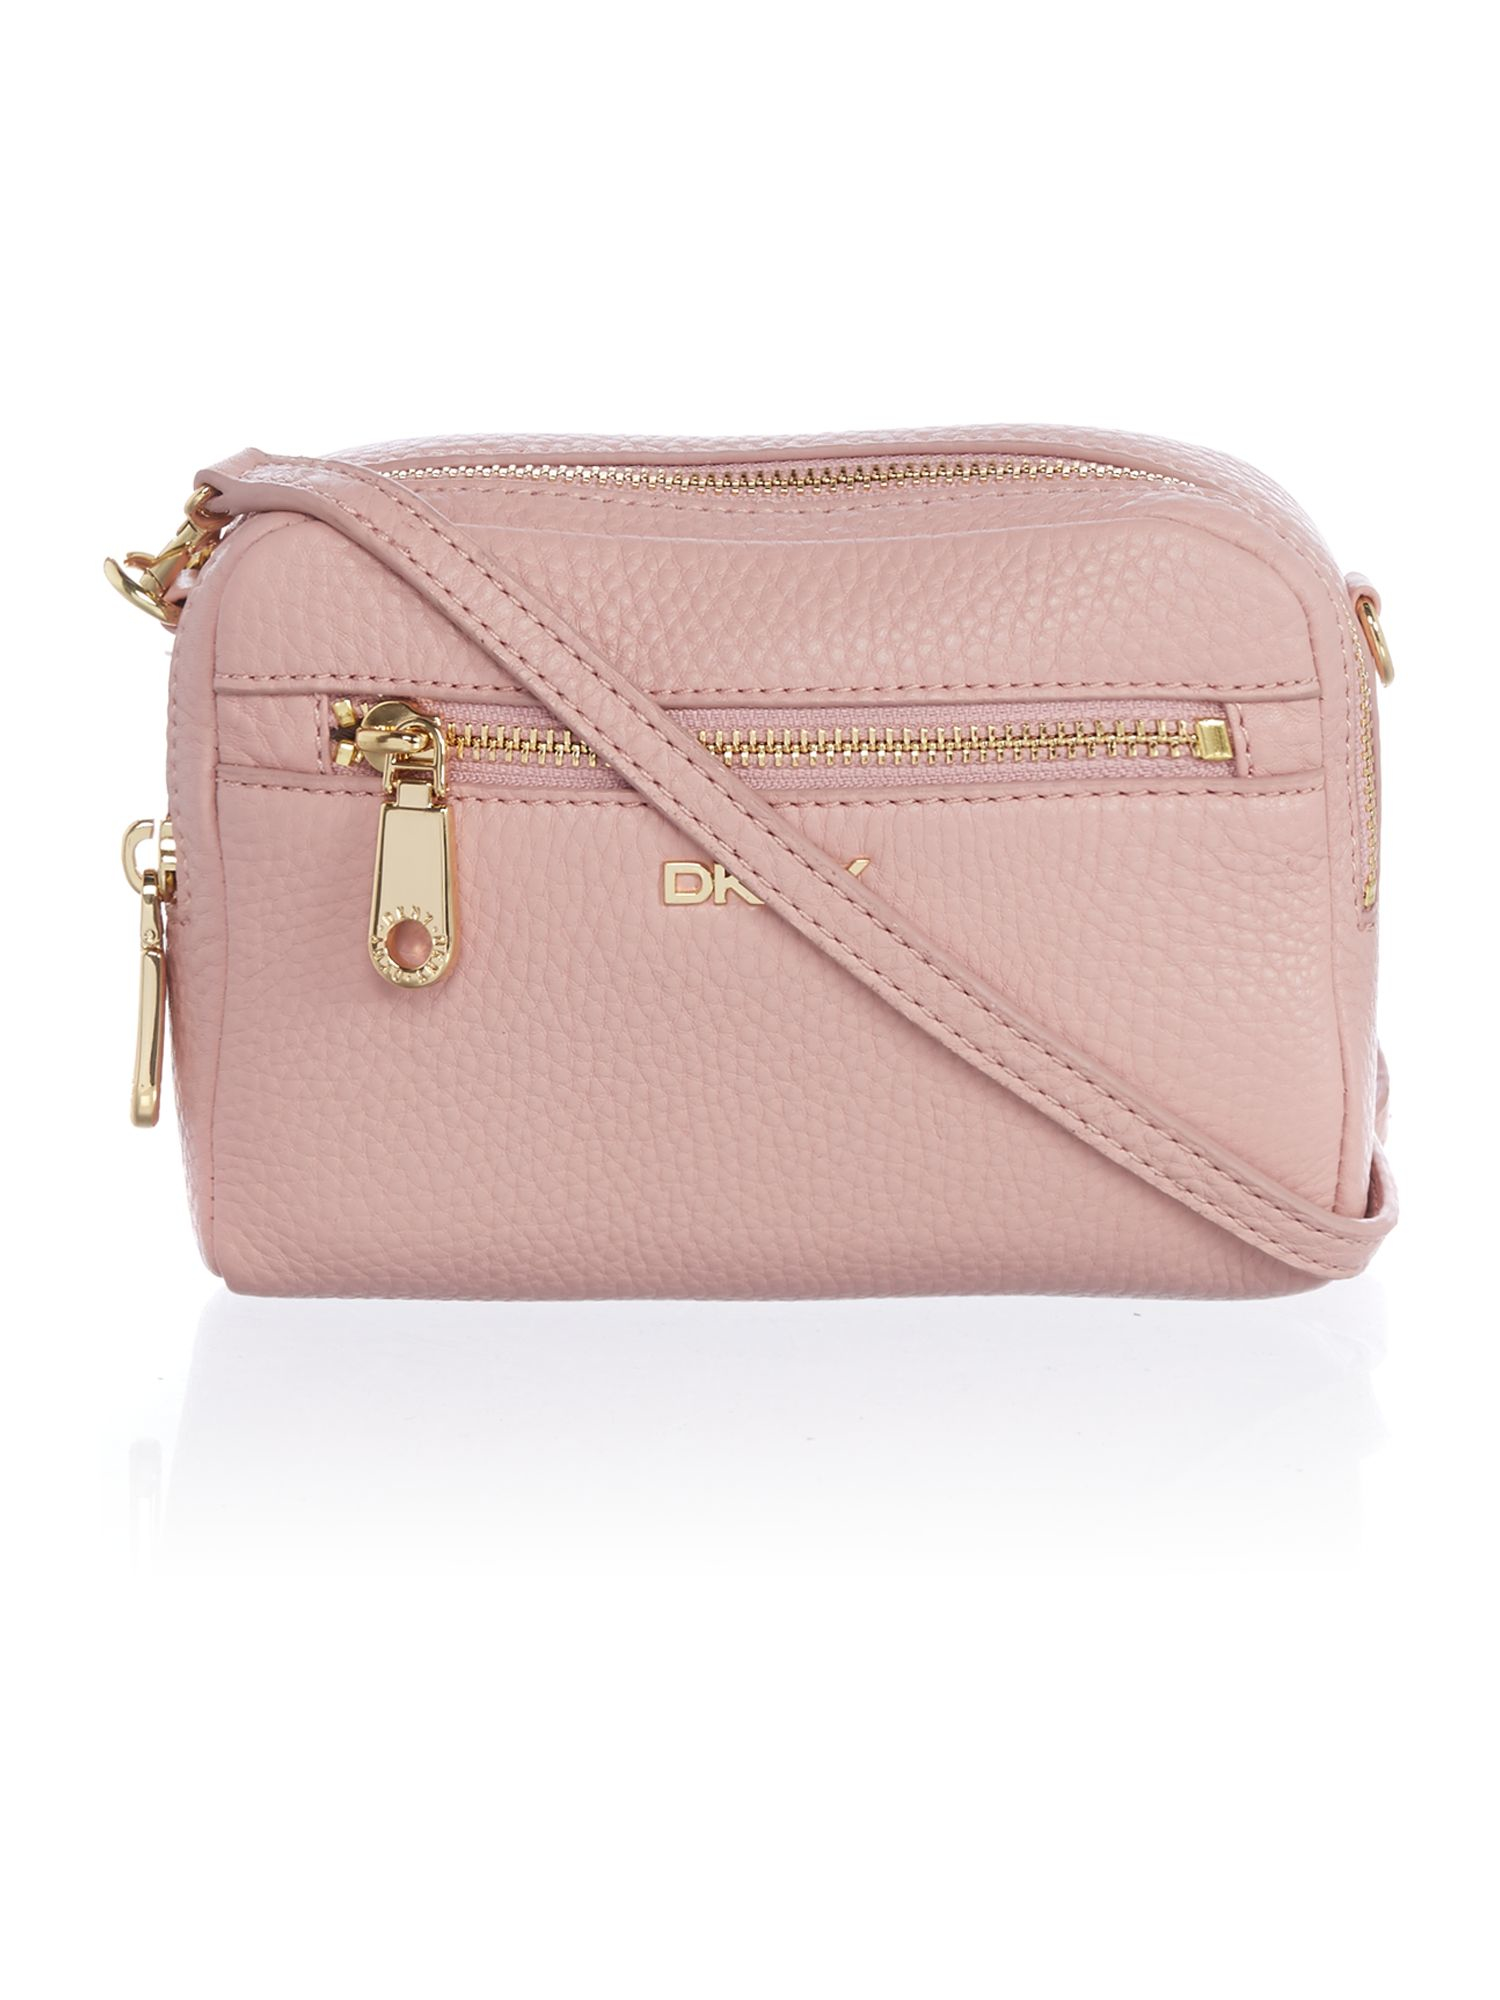 Dkny Tribeca Light Pink Small Cross Body Bag in Pink | Lyst